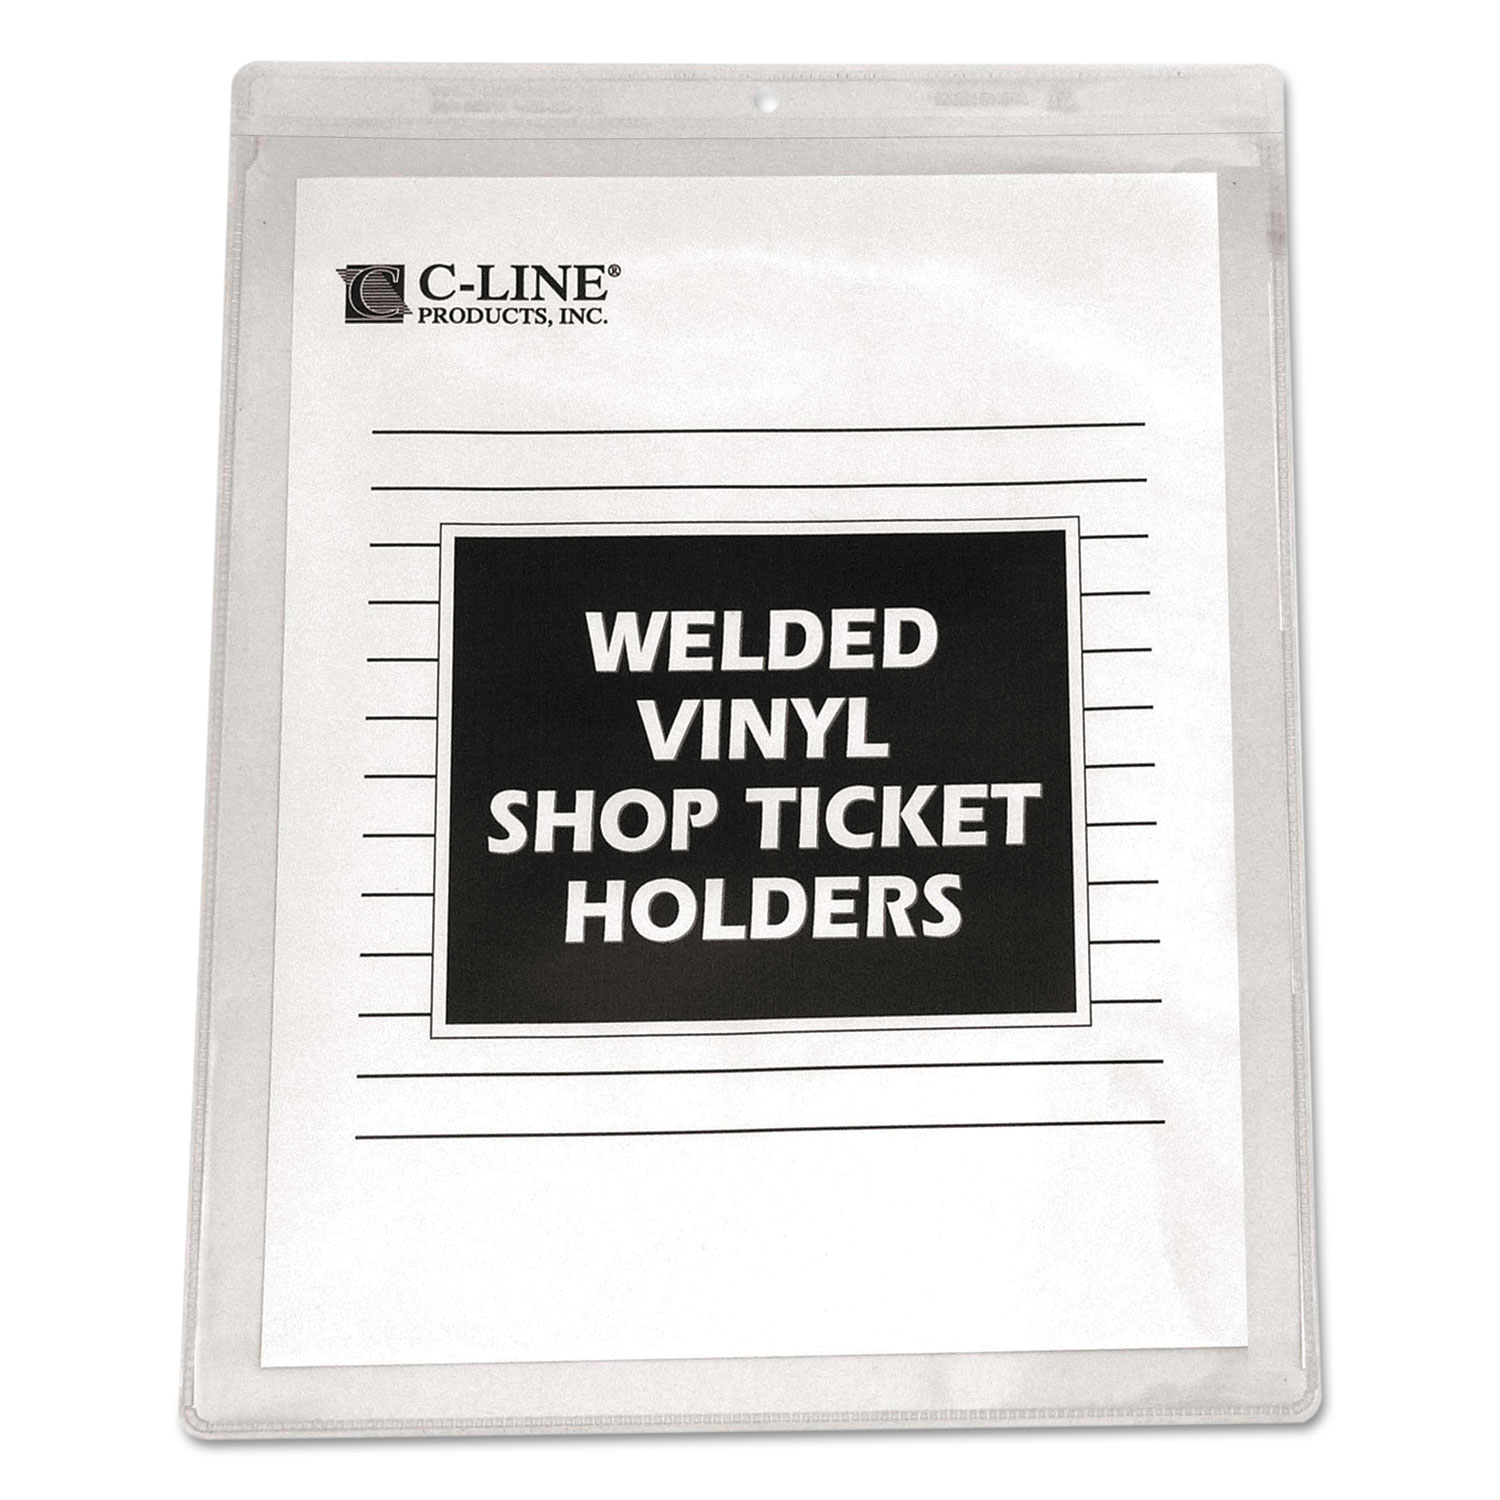 Clear Vinyl Shop Ticket Holders, Both Sides Clear, 15 Sheets, 8 1/2 x 11, 50/BX